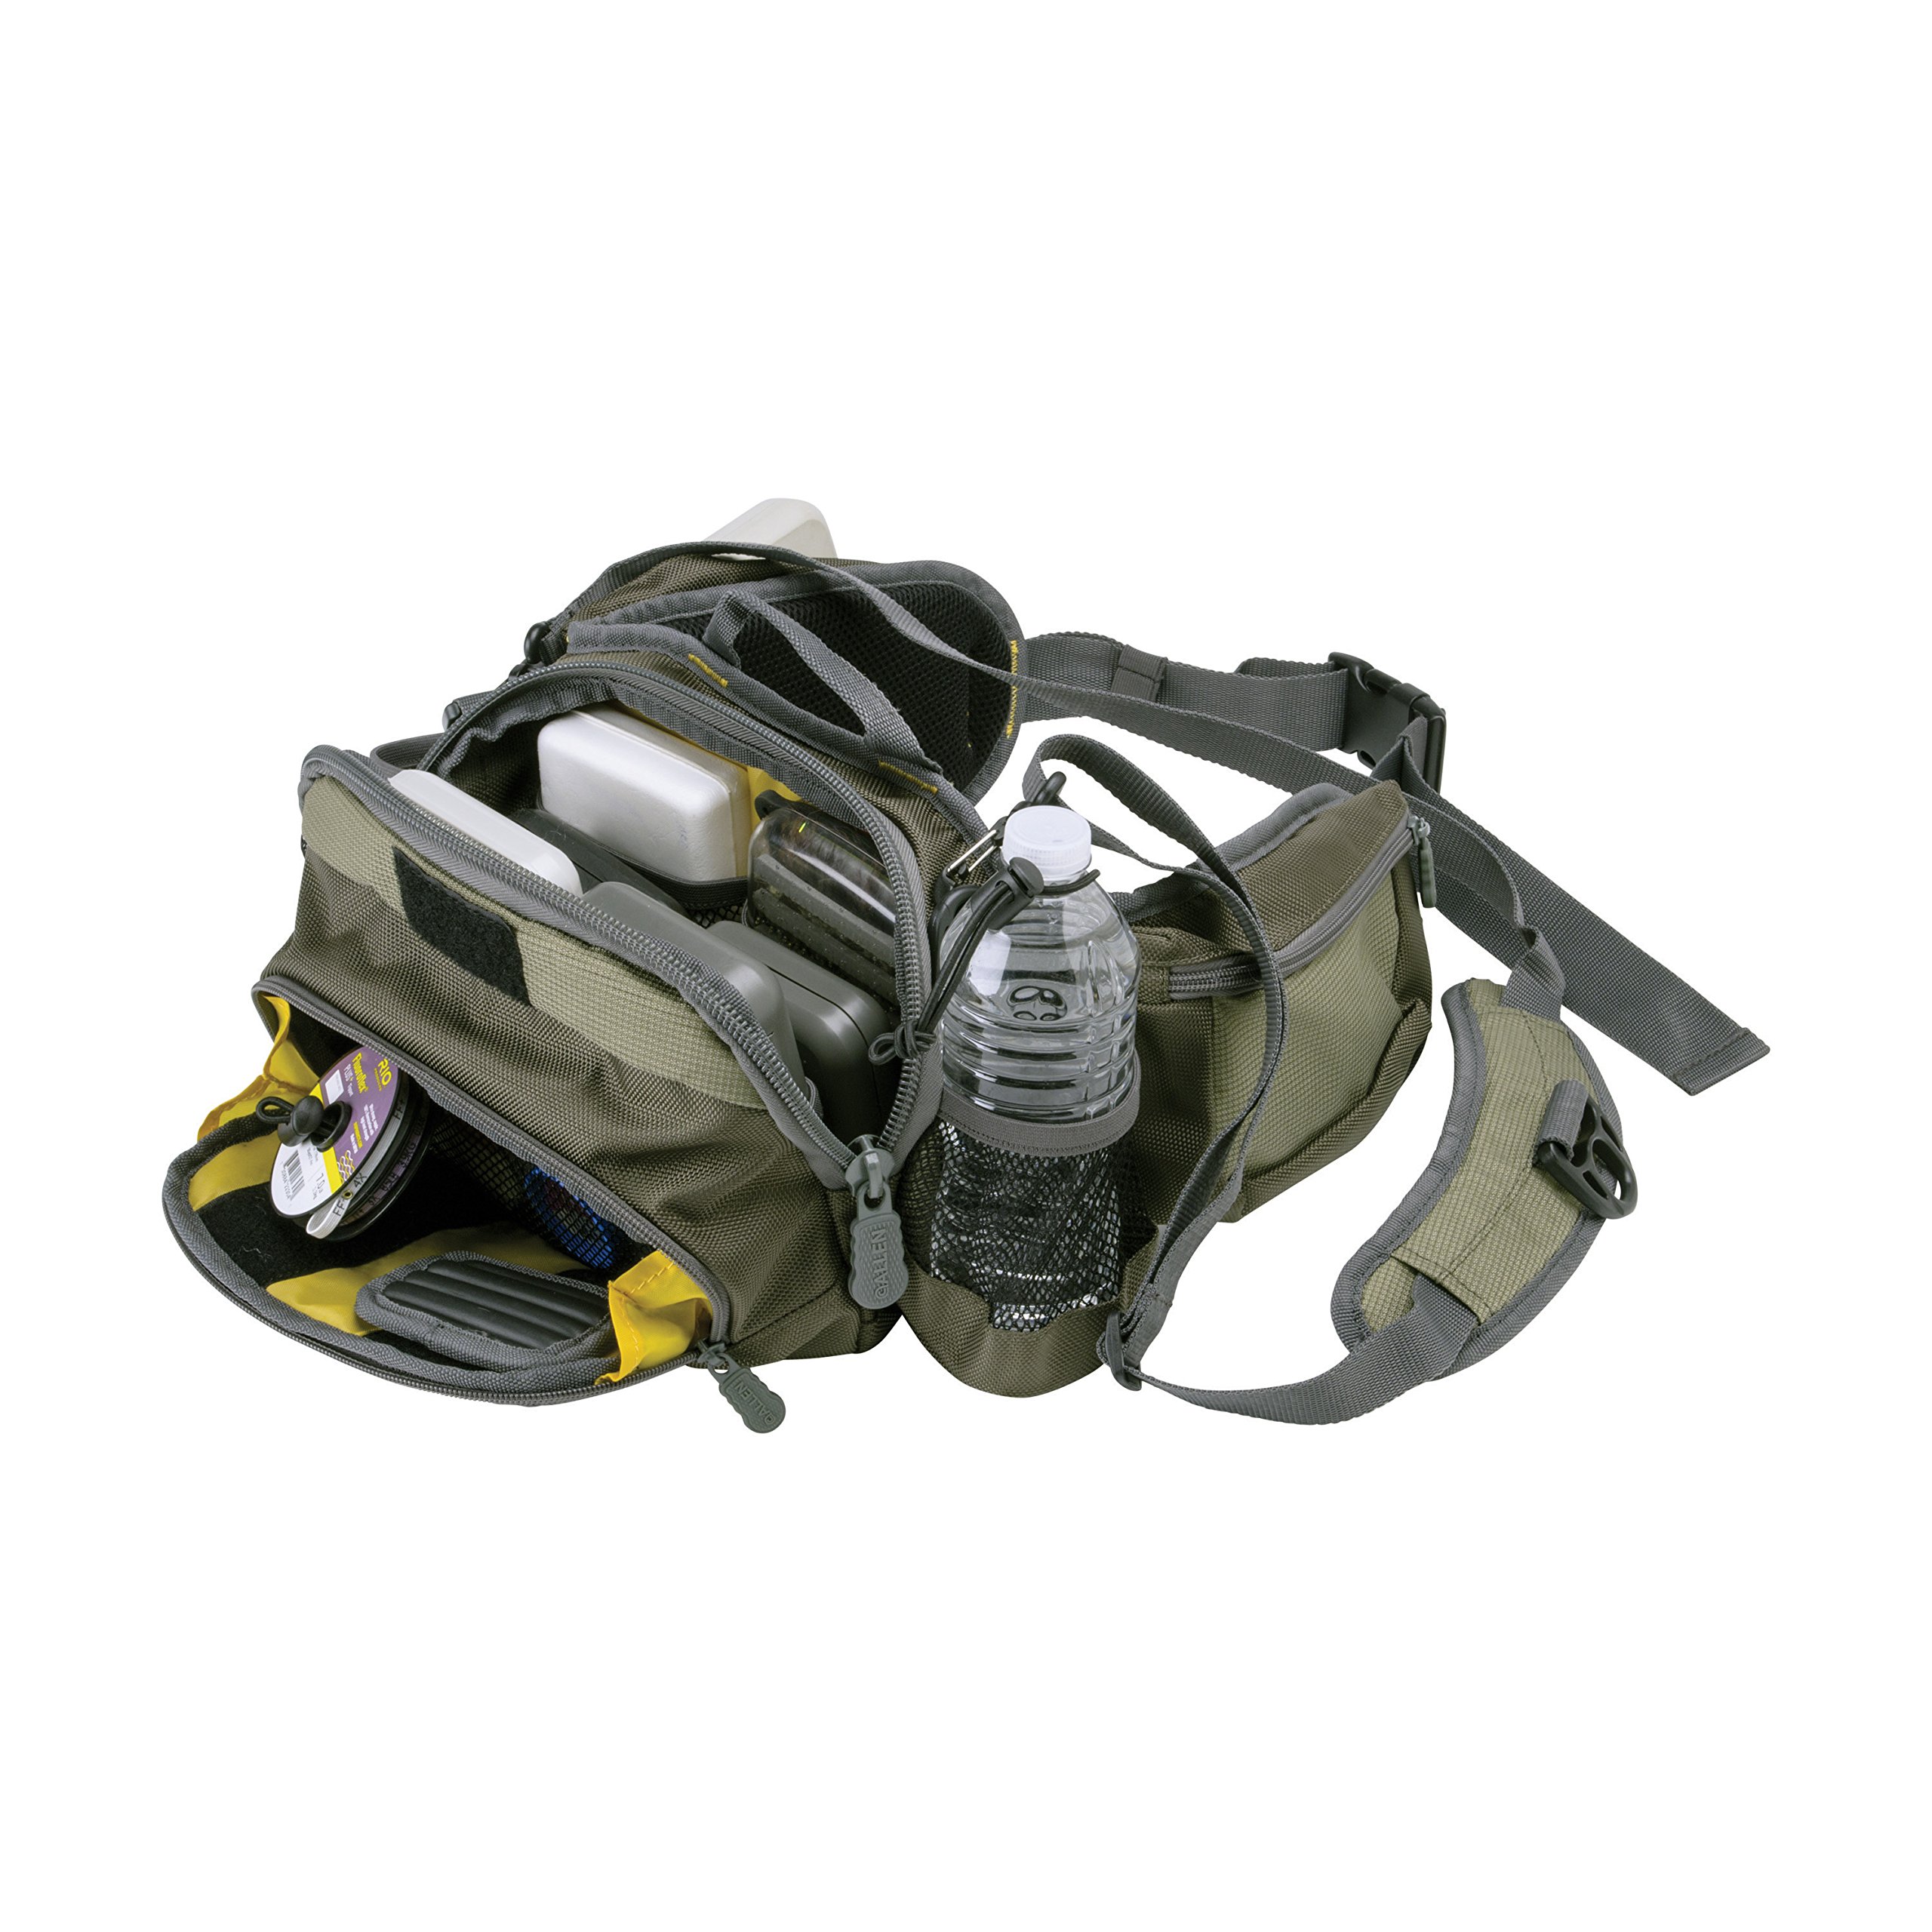 Eagle River Lumbar Pack, Fits up to 6 Tackle/Fly Boxes, 180 CU IN / 2.9 L